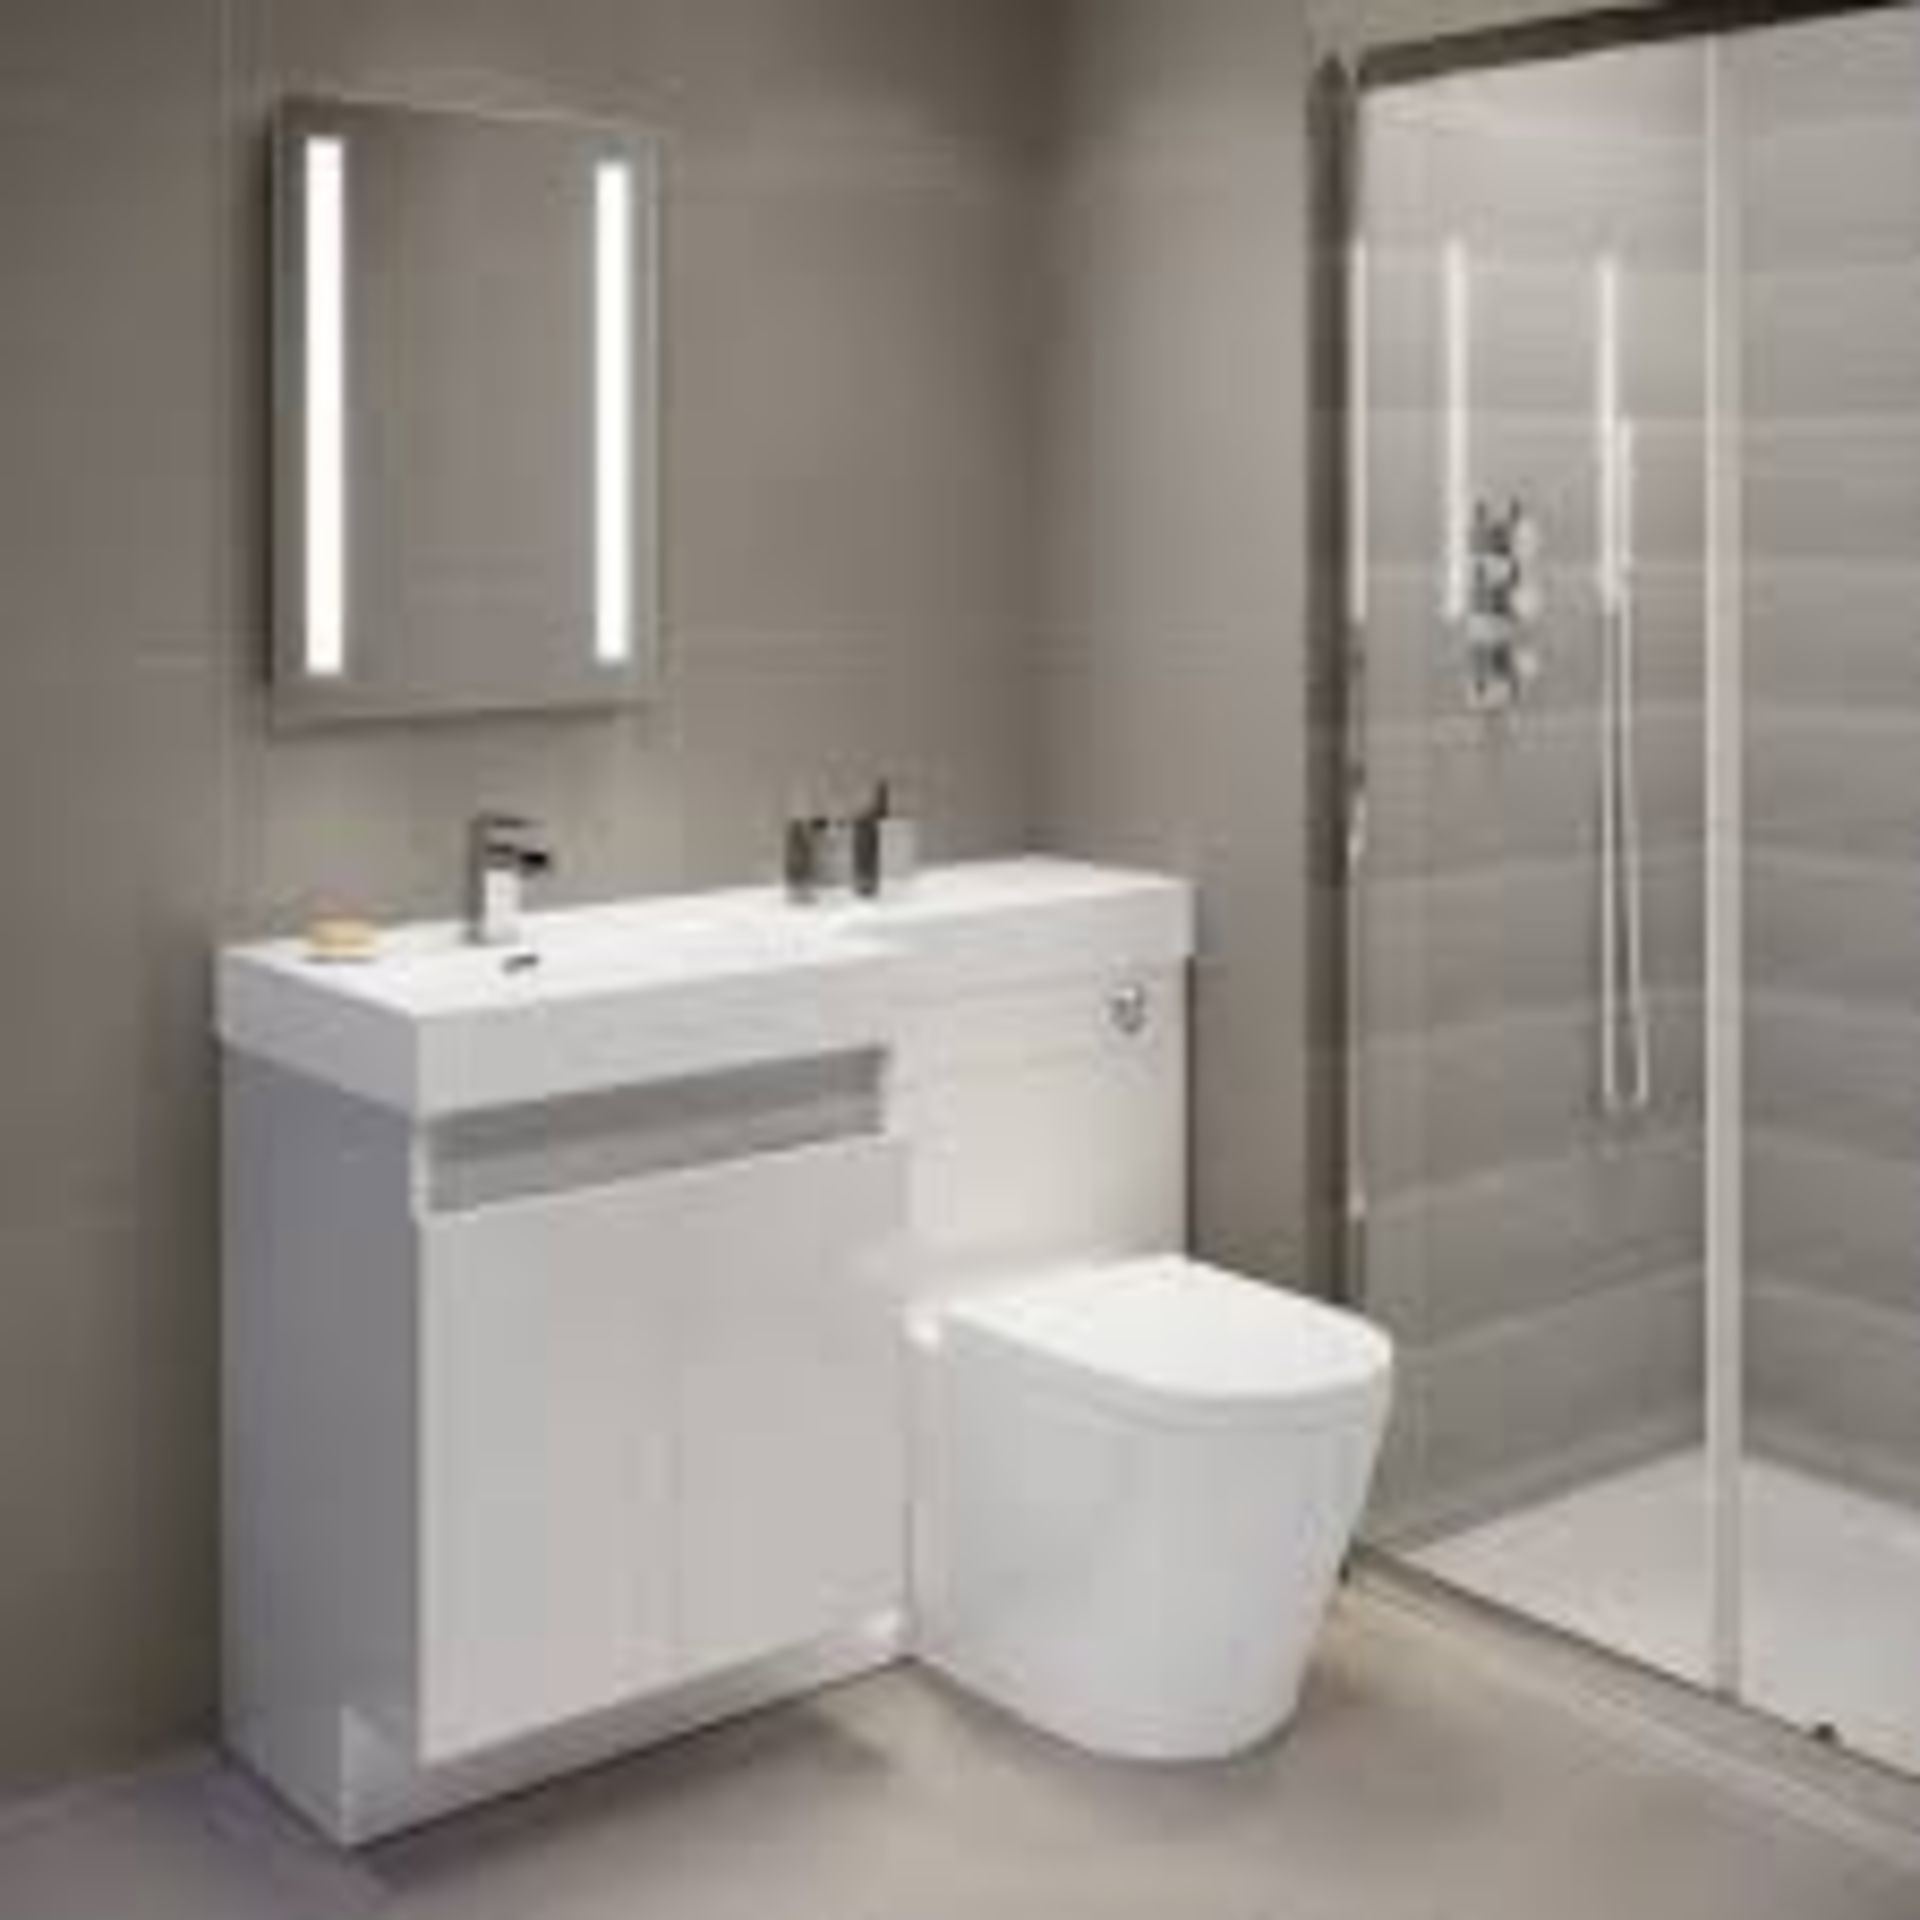 (J120) 500x700mm Omega LED Mirror - Battery Operated. RRP £299.99. Energy saving controlled On / Off - Image 4 of 4